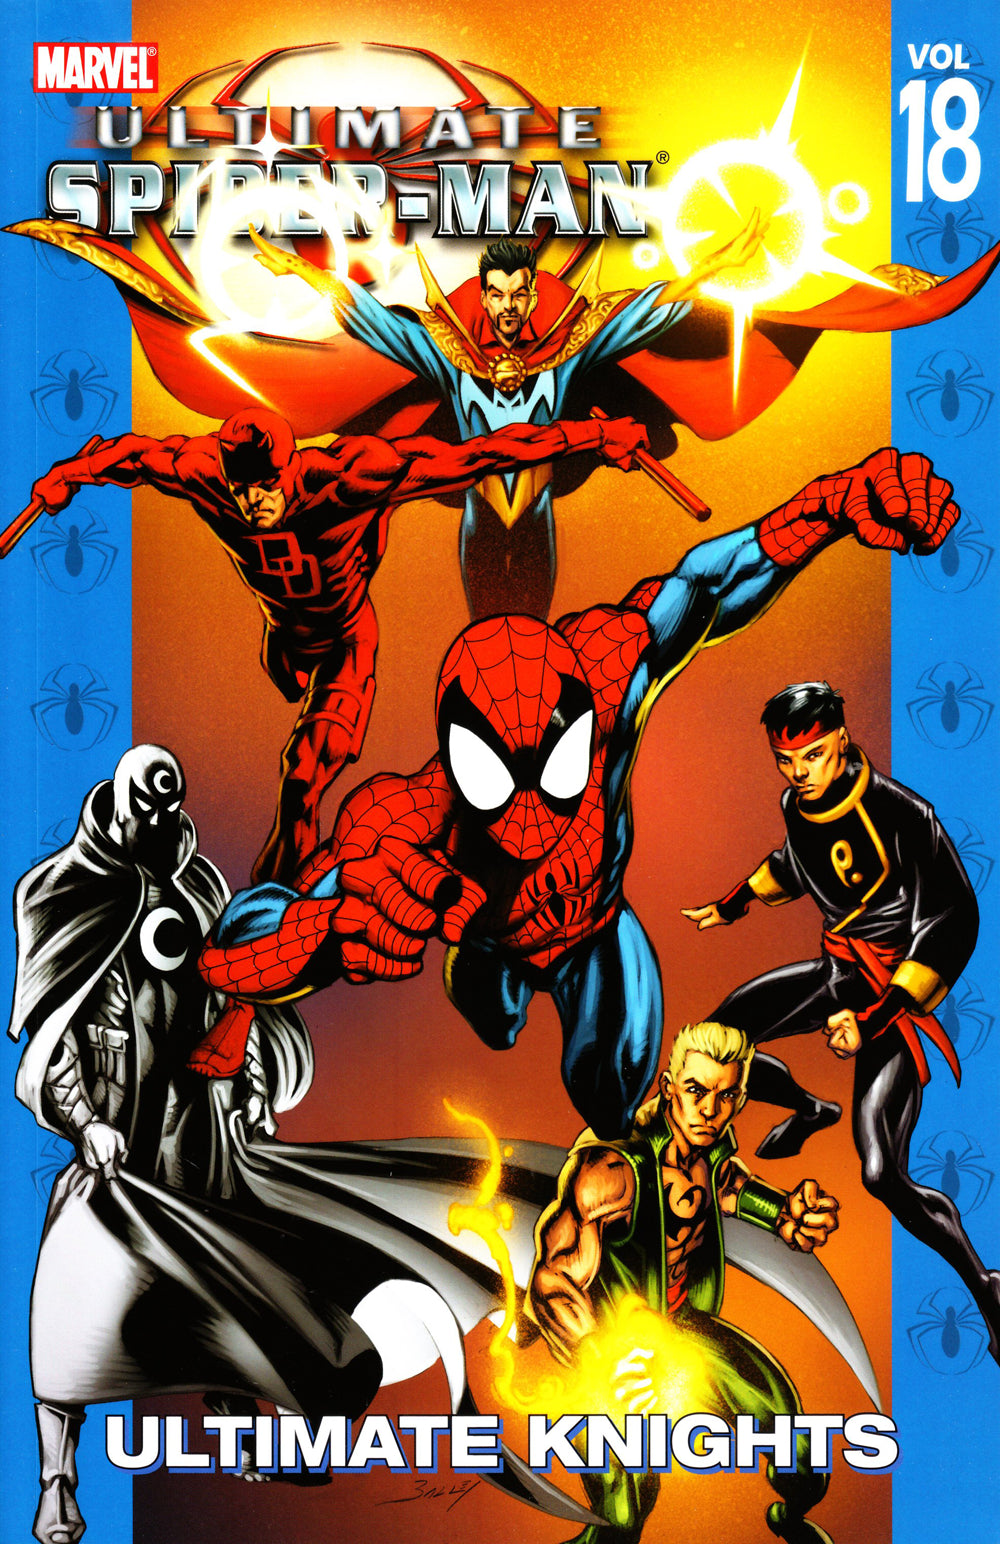 Ultimate Spider-Man Vol 18: Ultimate Knights TPB